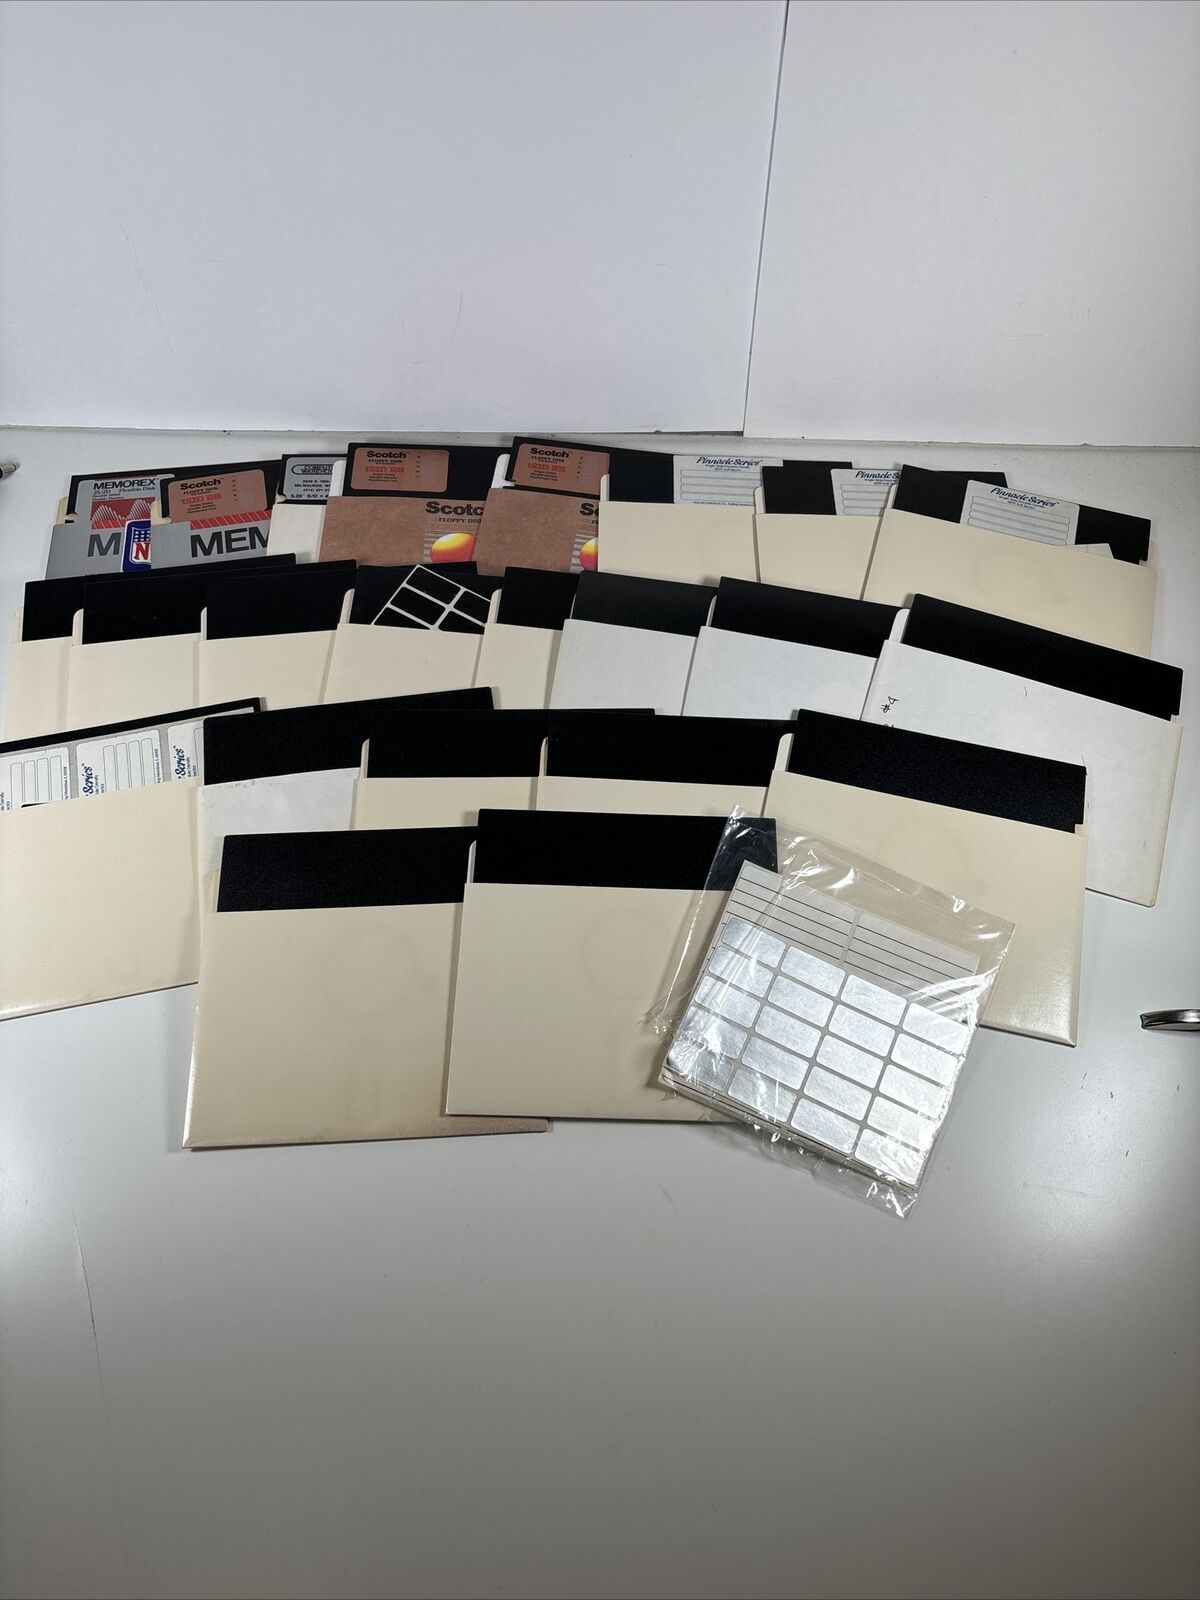 23 Floppy Used Disks C64 Commodore 64 Vintage Computer